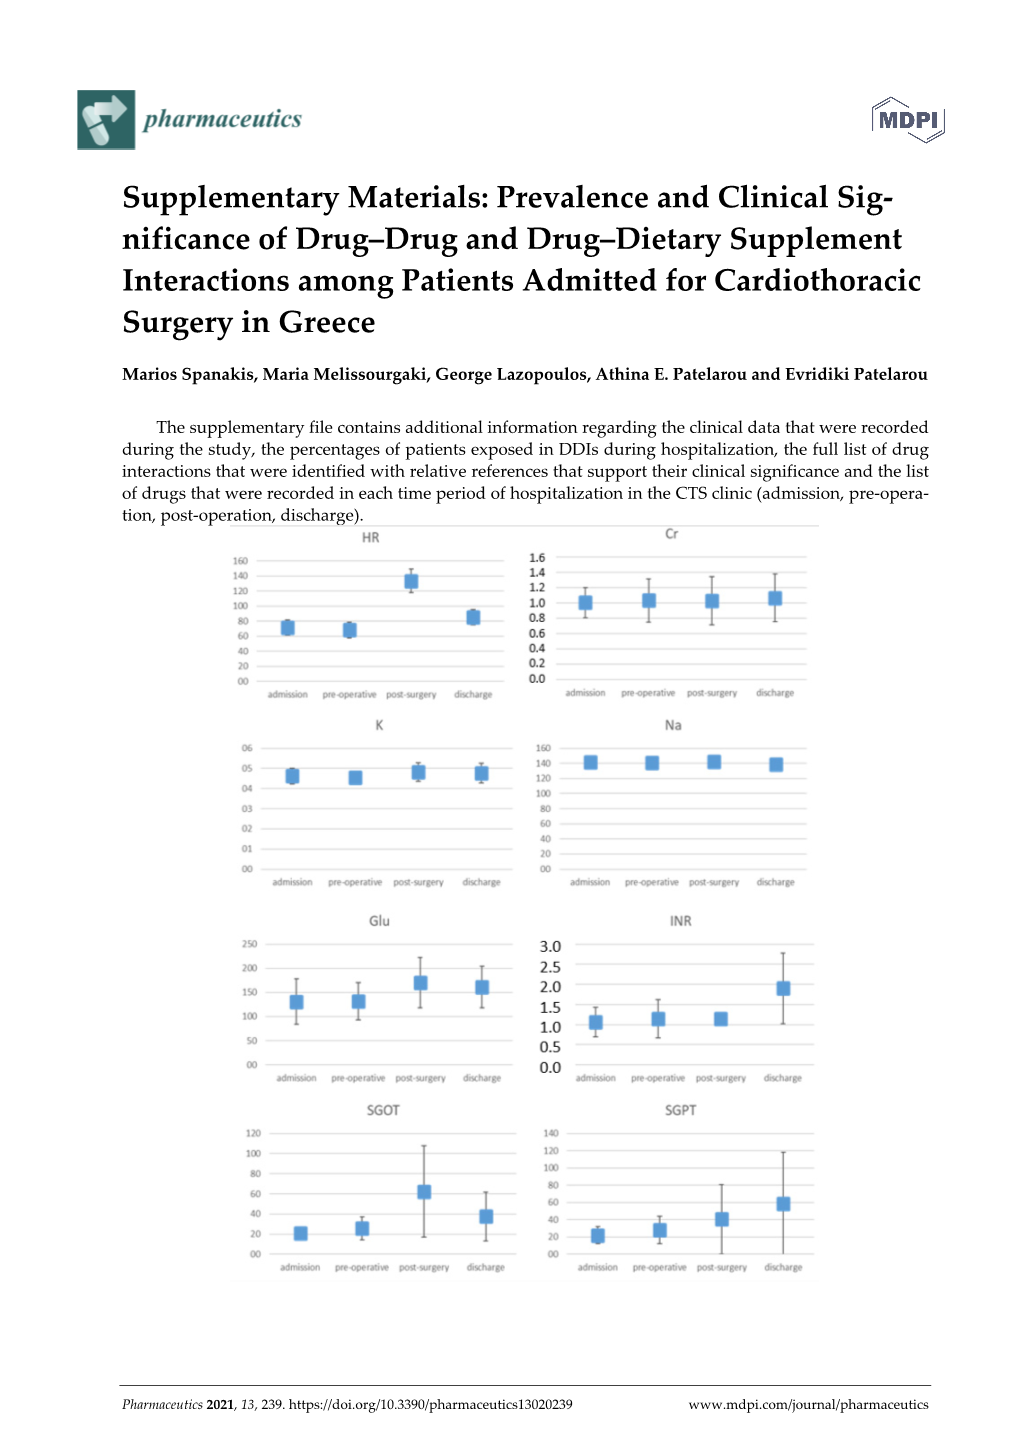 Prevalence and Clinical Sig- Nificance of Drug–Drug and Drug–Dietary Supplement Interactions Among Patients Admitted for Cardiothoracic Surgery in Greece